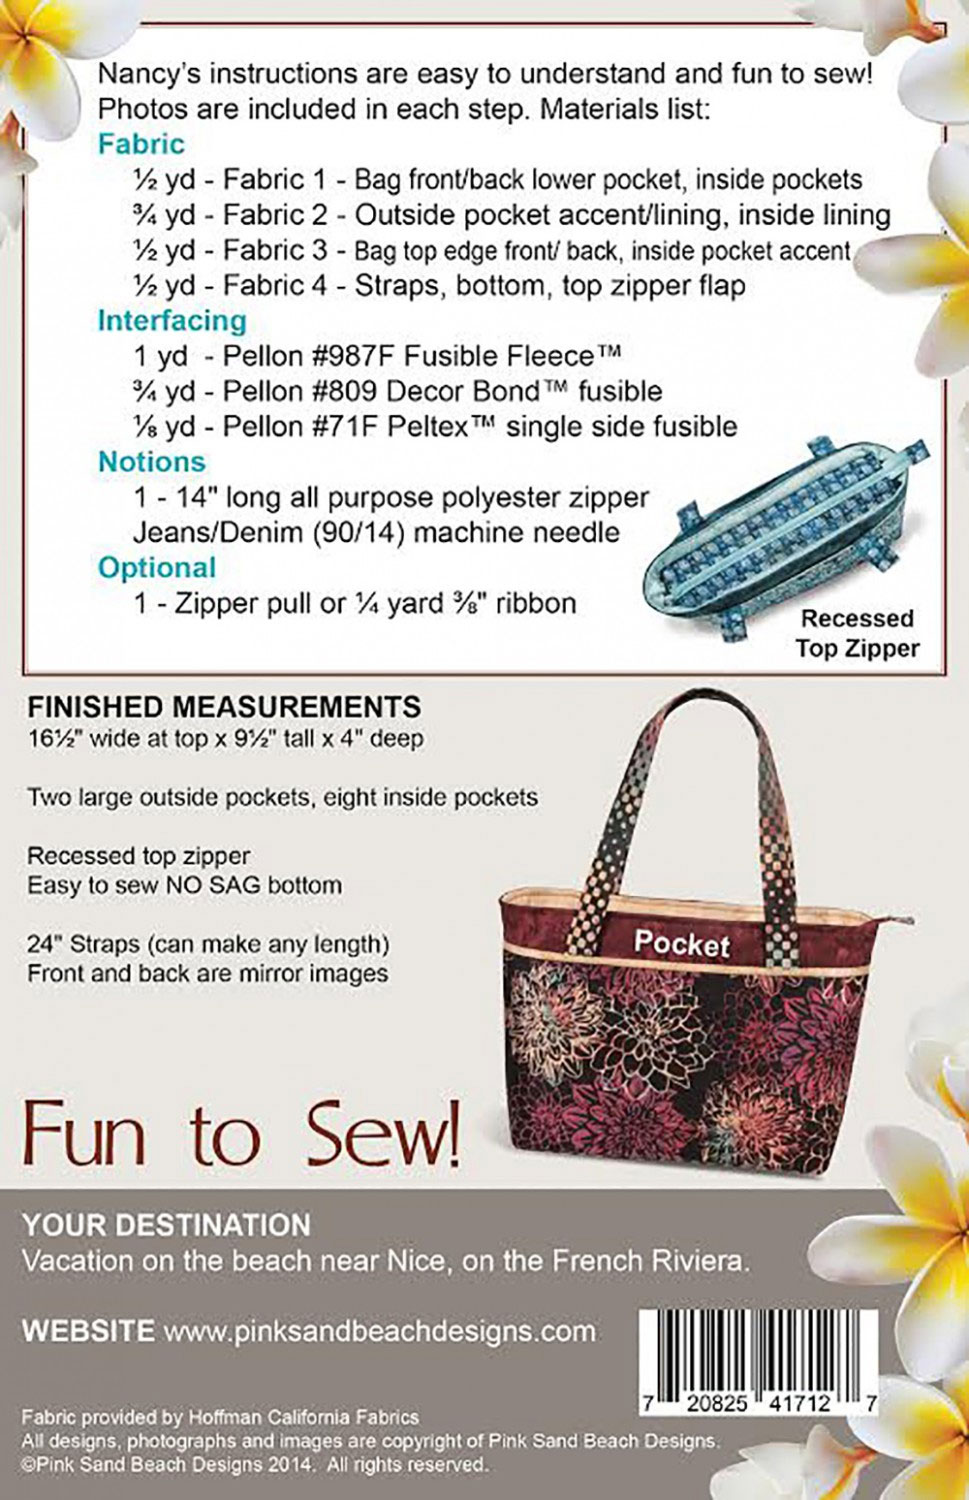 Brentwood-106 Brentwood Bag Kit by Pink Sand Beach Designs